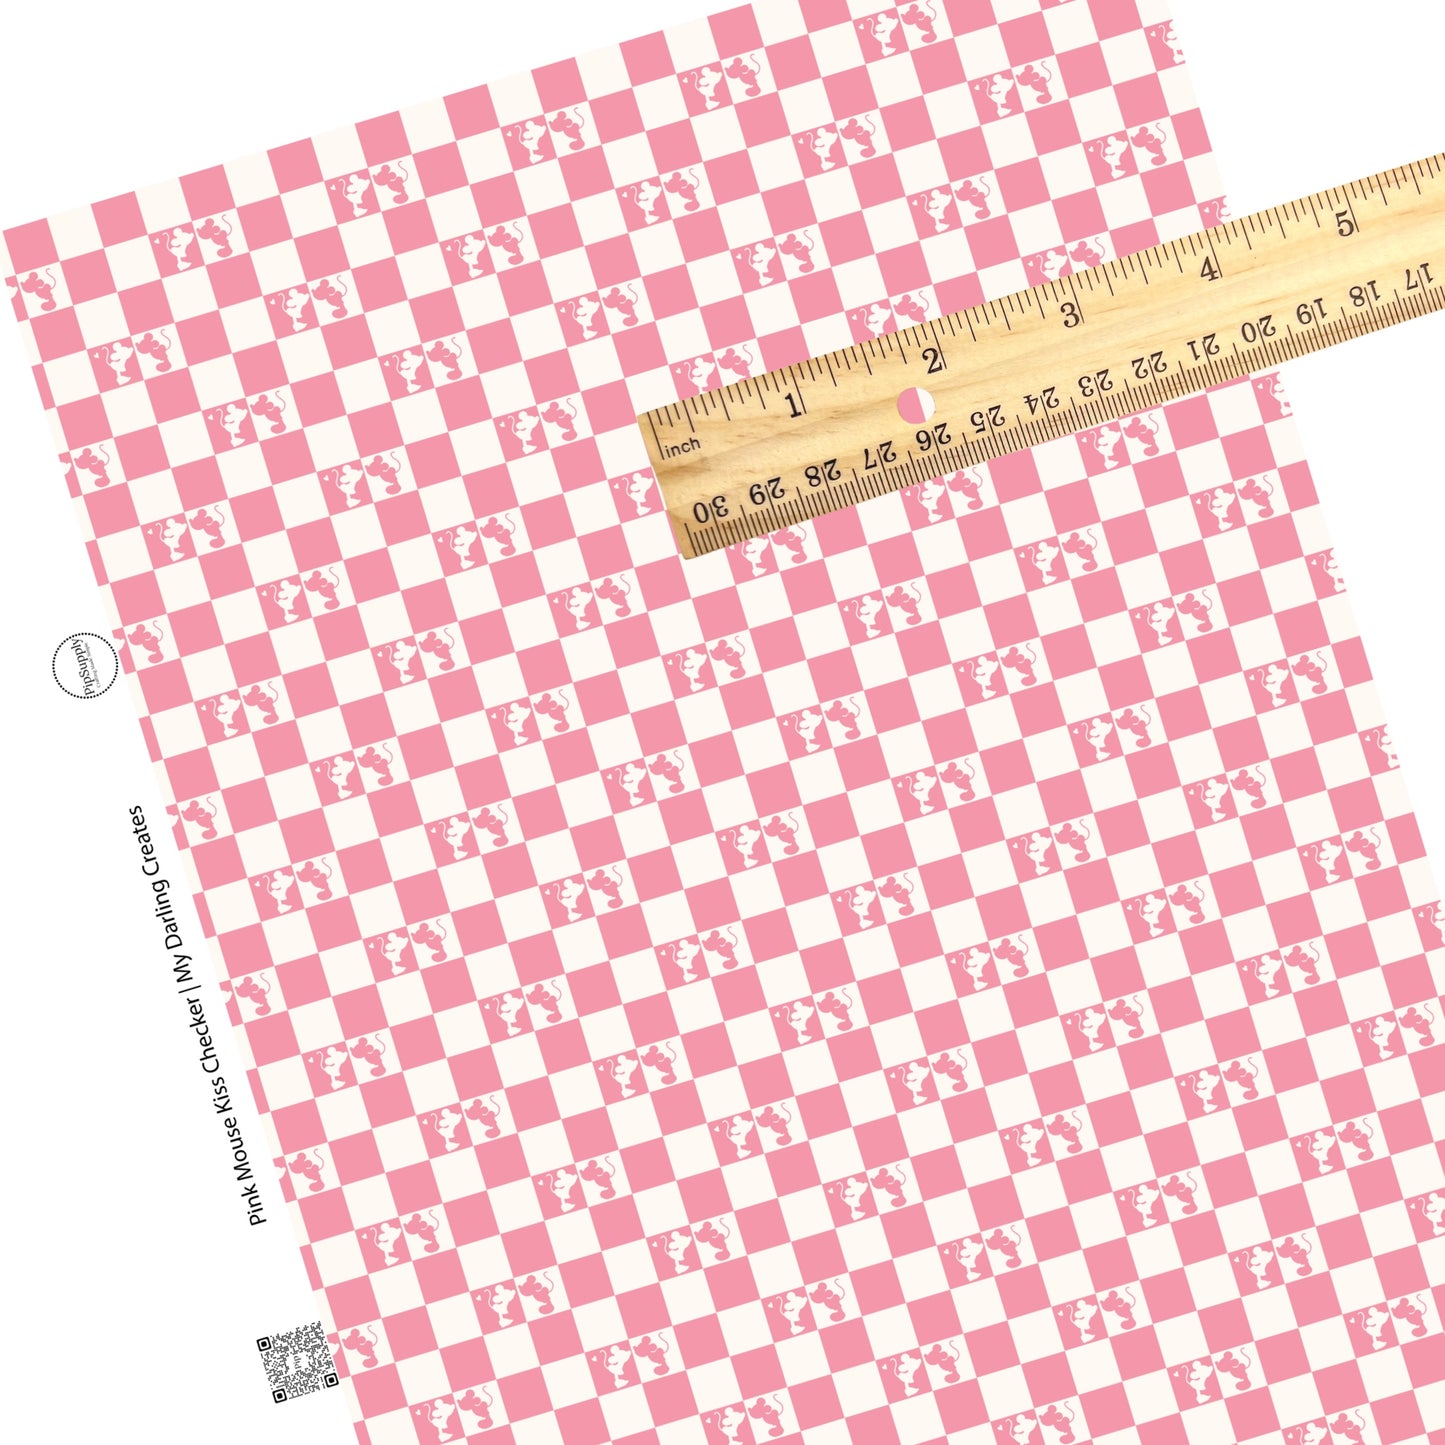 These Valentine's pattern themed faux leather sheets contain the following design elements: mouses kissing on a pink and cream checker pattern. Our CPSIA compliant faux leather sheets or rolls can be used for all types of crafting projects.